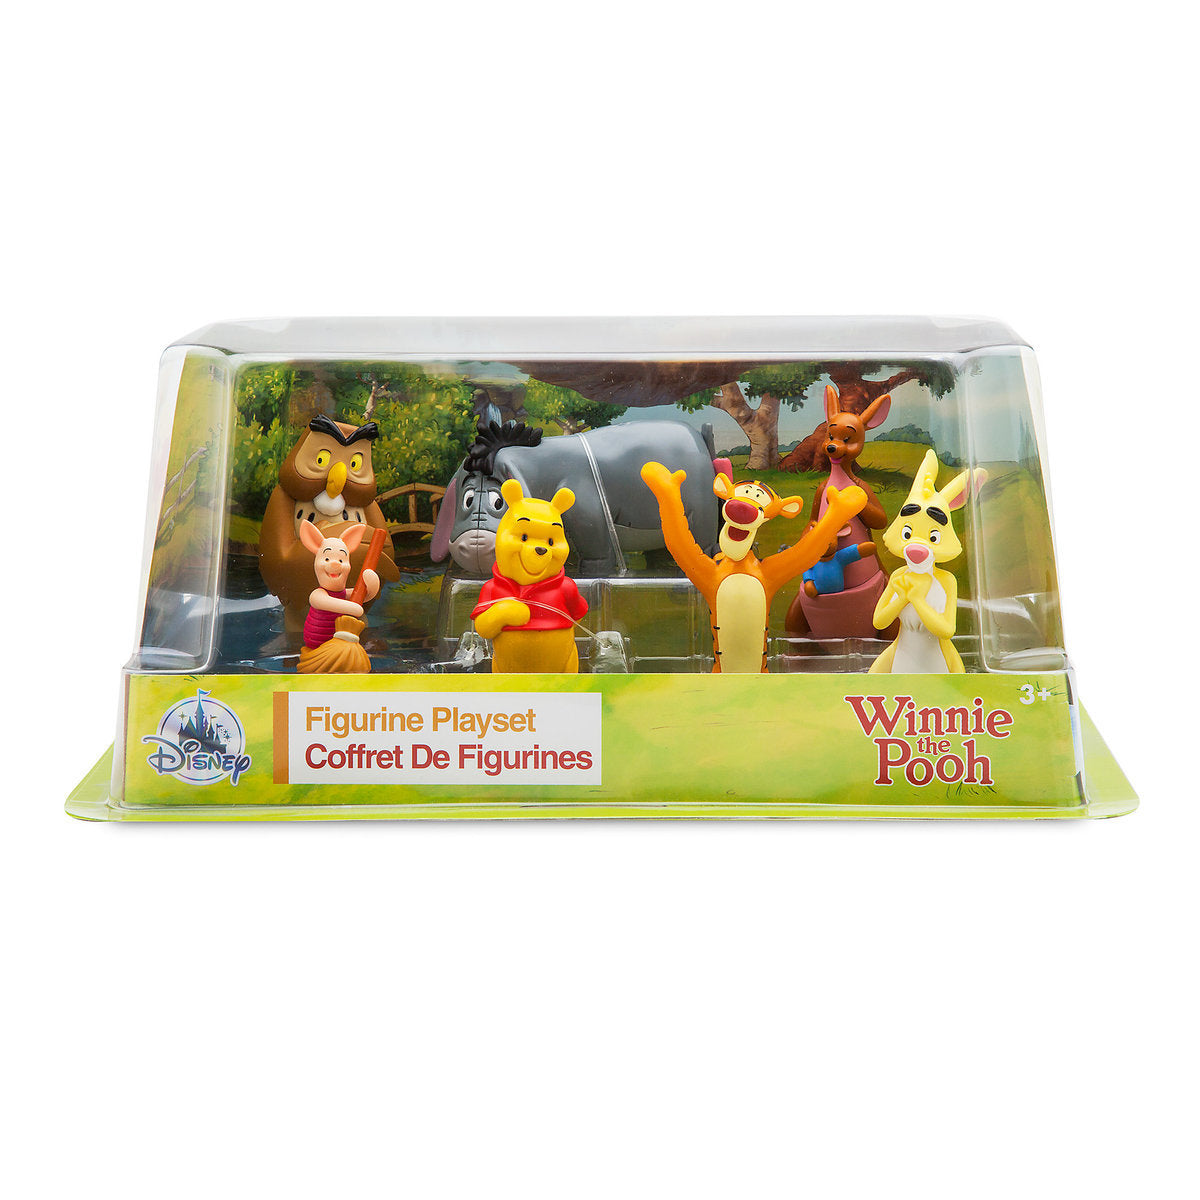 Winnie the Pooh Character cake topper sets. Classic collection